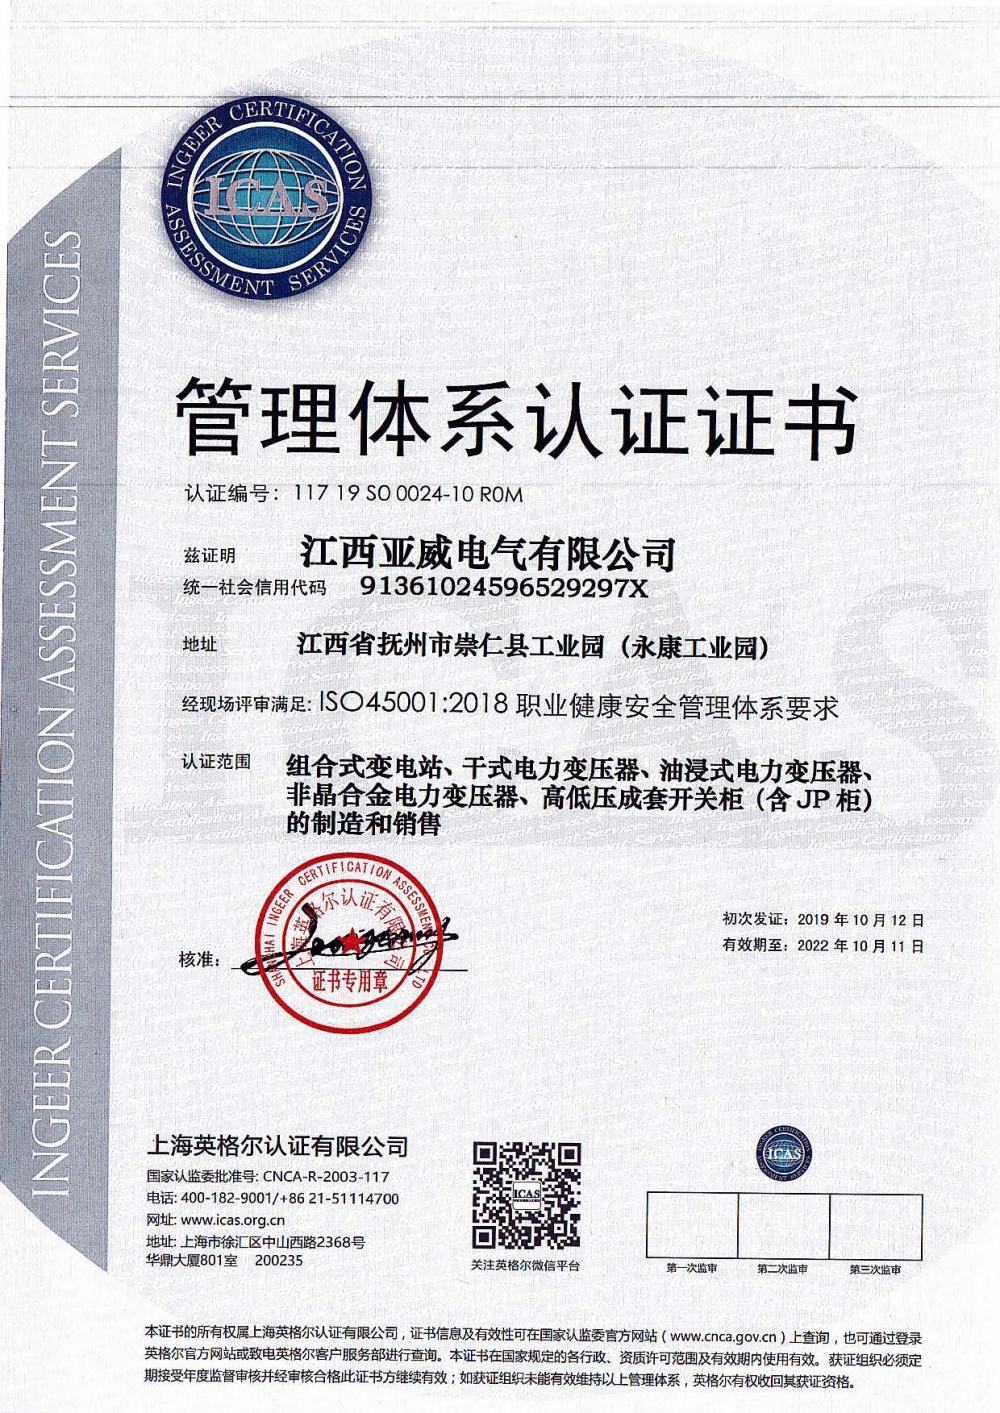 China occupational health and safety management system certification